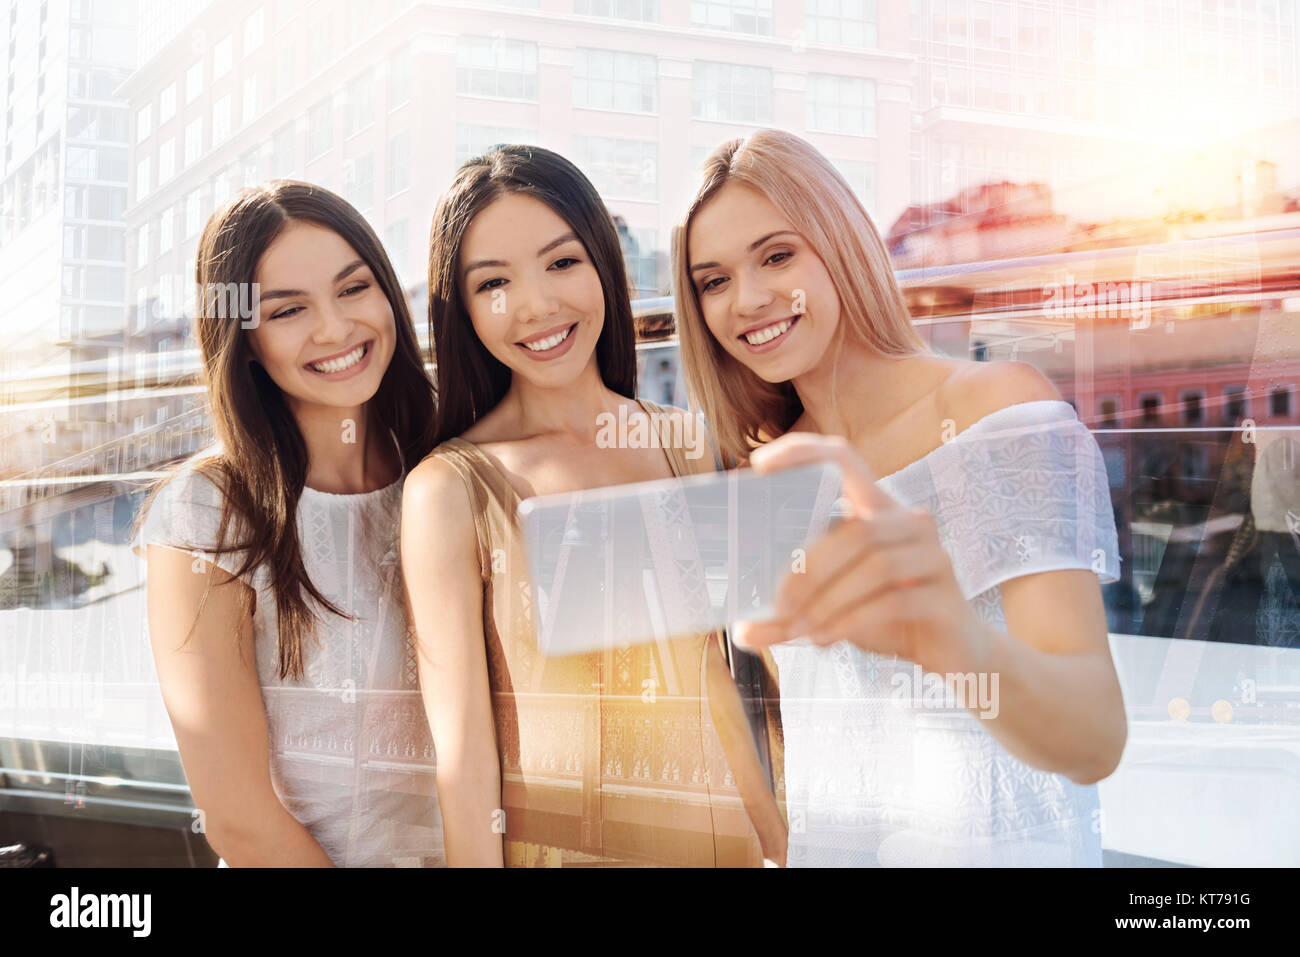 Attractive young women taking a selfie Stock Photo